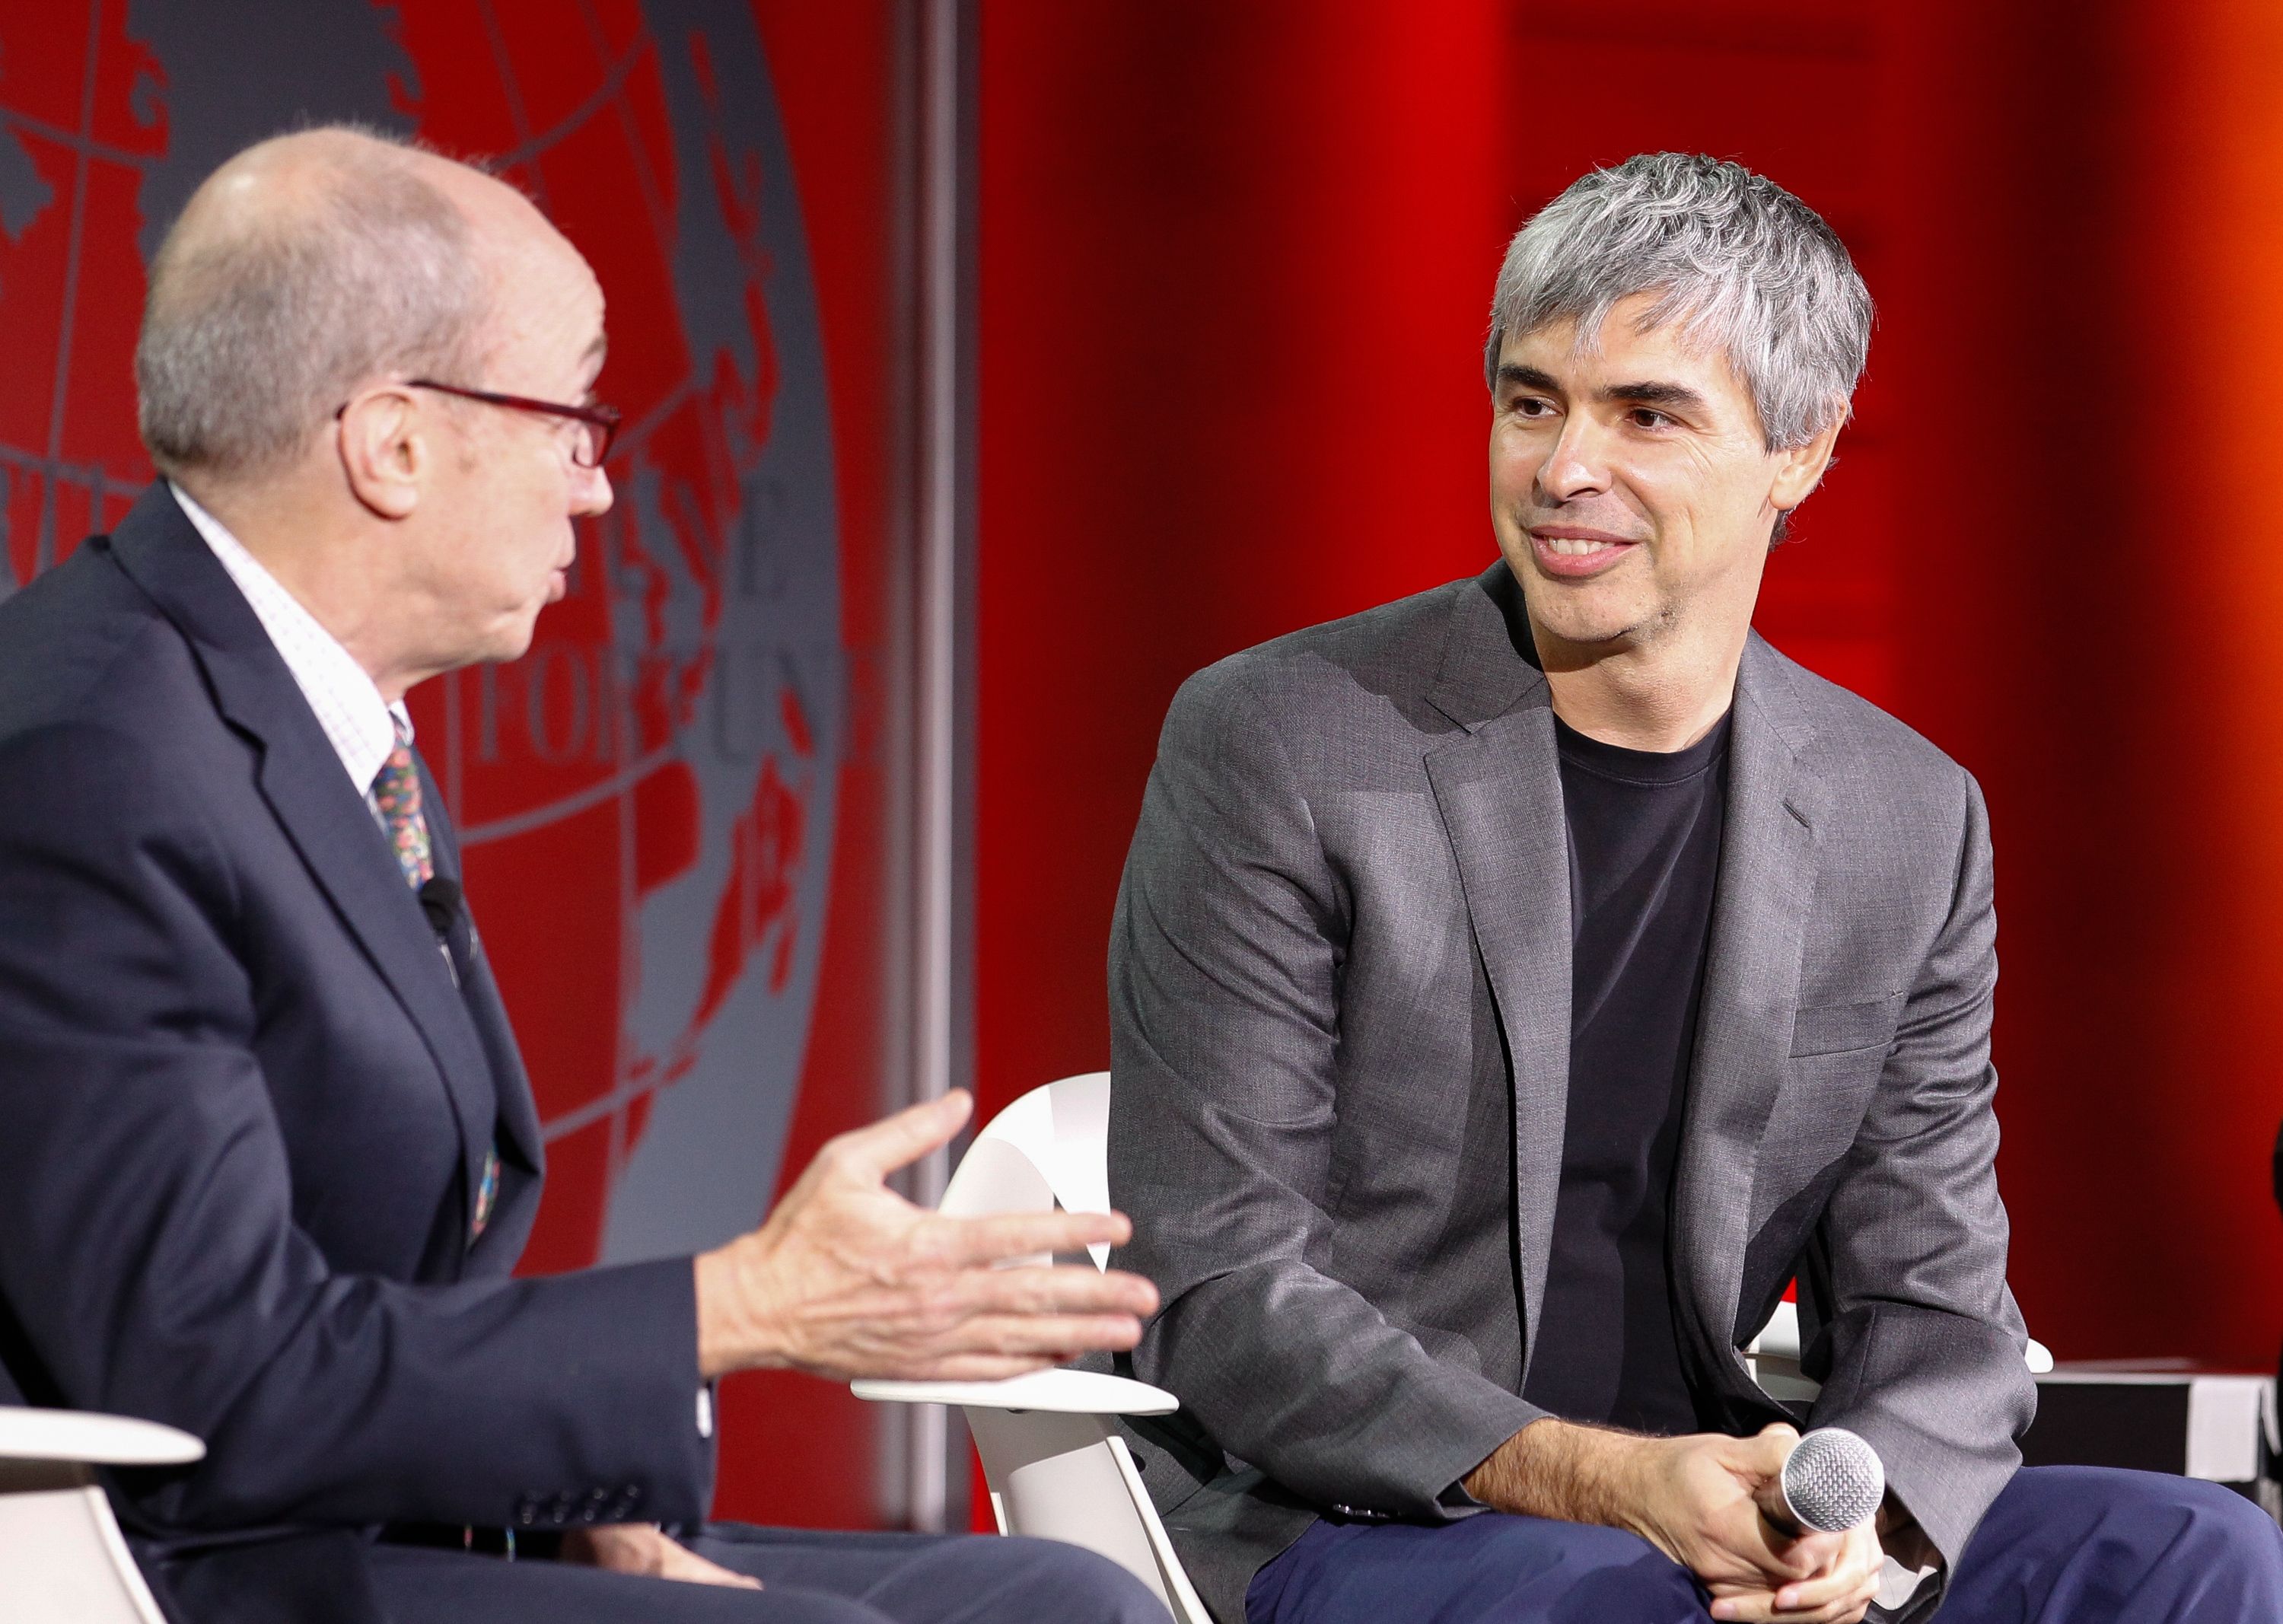 SAN FRANCISCO, CA - NOVEMBER 02: Larry Page (R) and Alan Murray speak during the Fortune Global Forum at the Legion Of Honor on November 2, 2015 in San Francisco, California. (Photo by Kimberly White/Getty Images for Fortune)